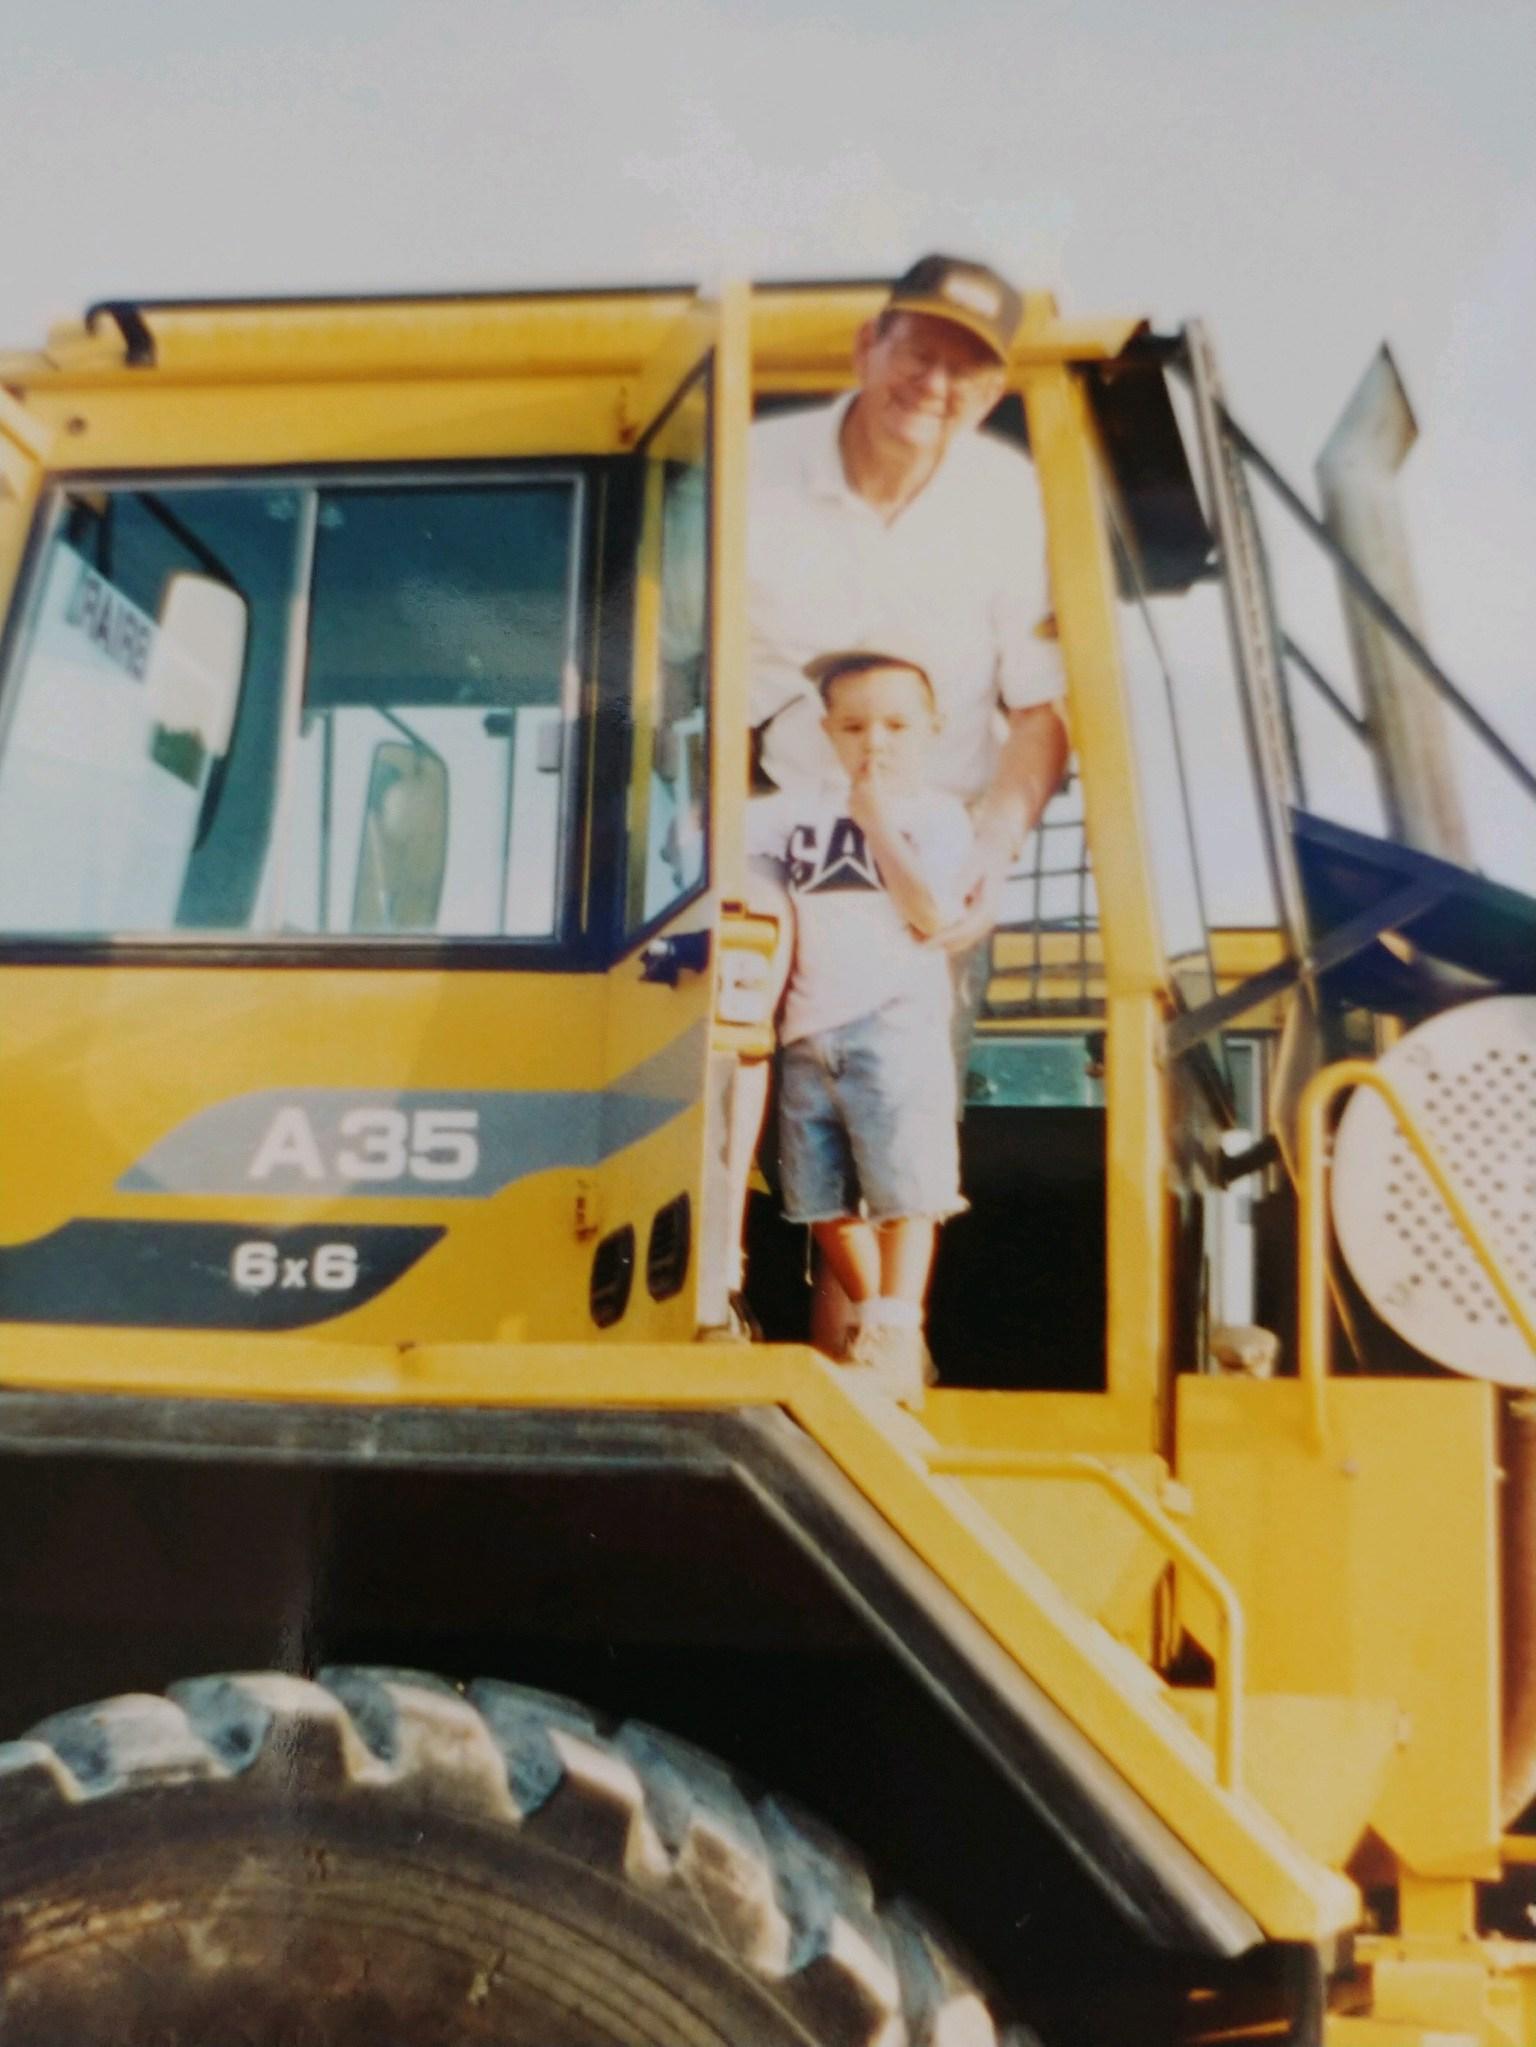 Everytime I look at tractors it reminds me of my childhood with you. Miss you and love you.